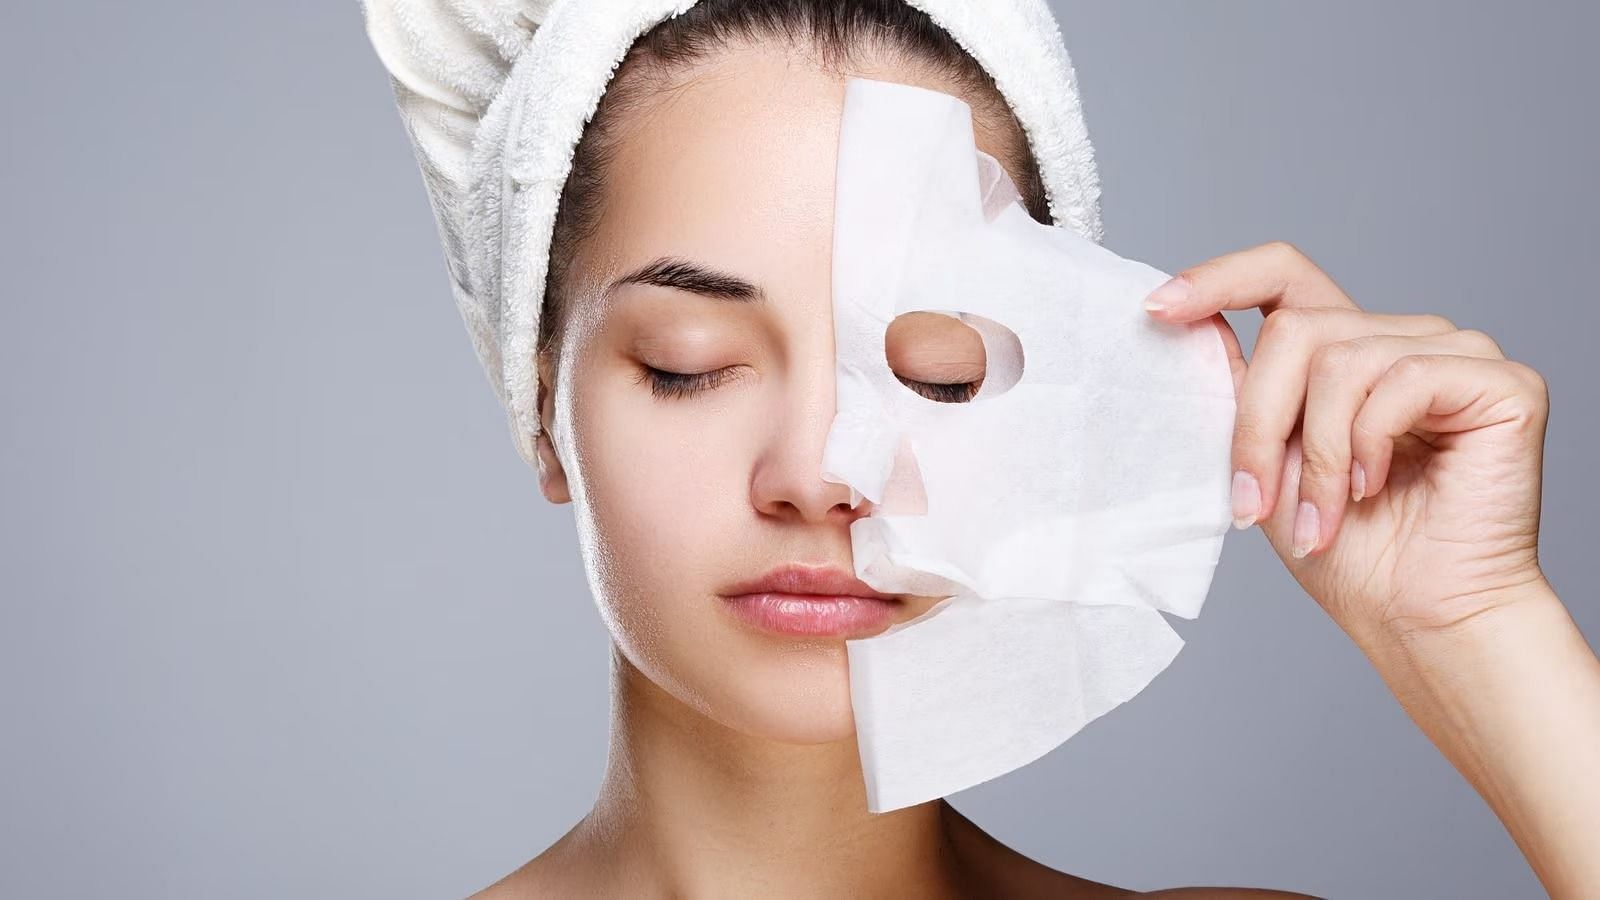 Face mask - skincare essential (Image via Getty Images)